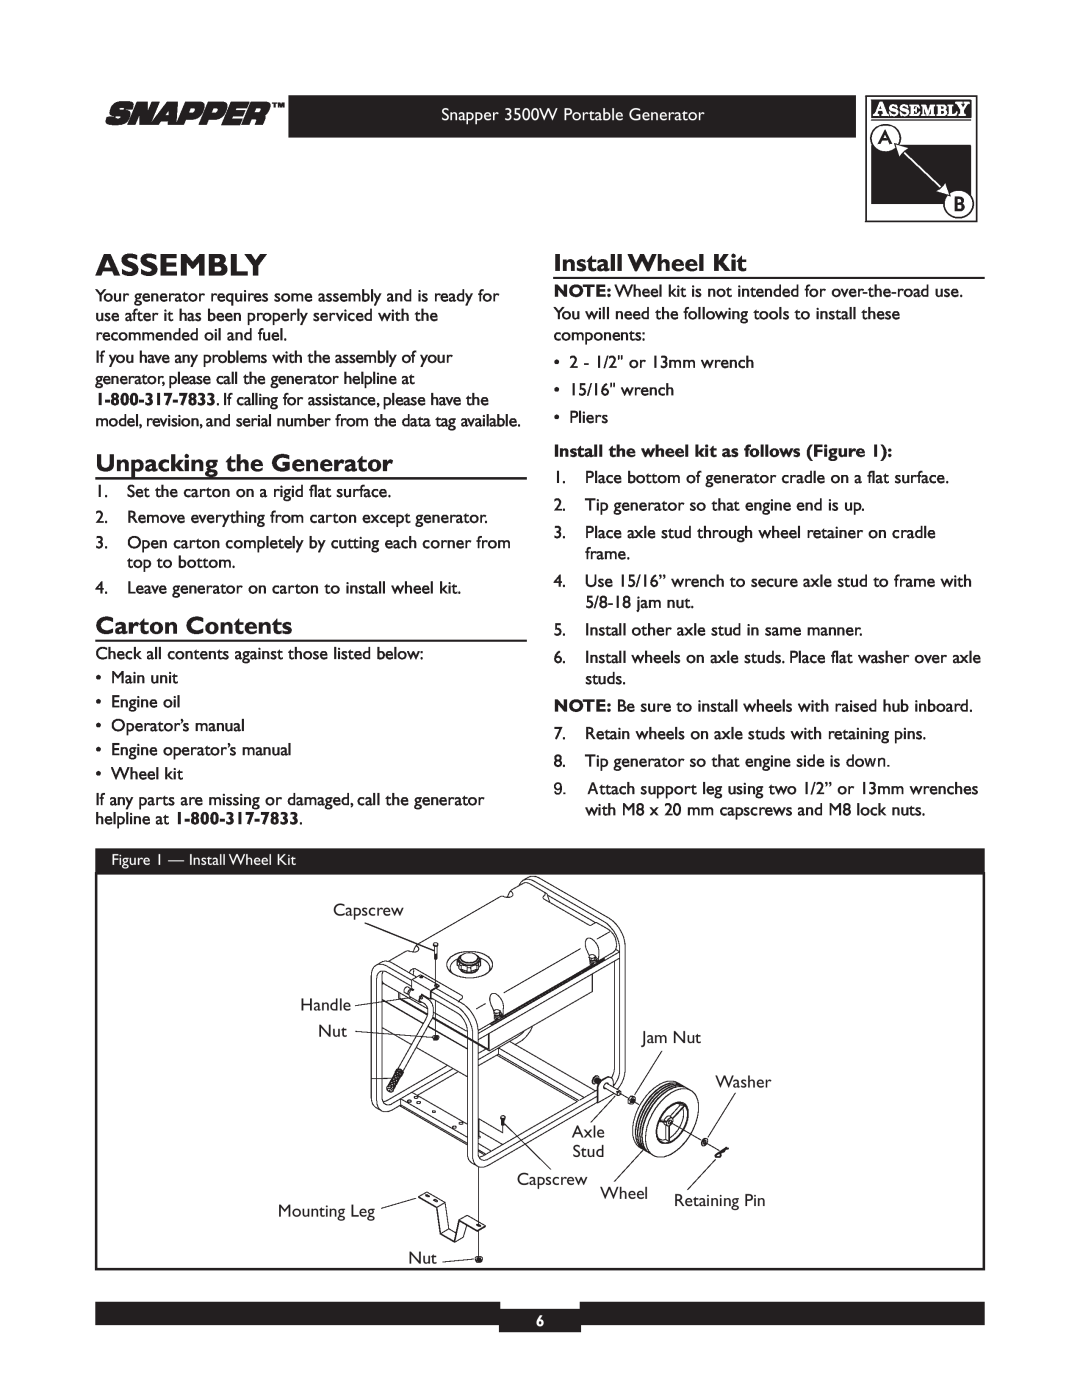 Snapper manual Assembly, Unpacking the Generator, Install Wheel Kit, Carton Contents, Snapper 3500W Portable Generator 